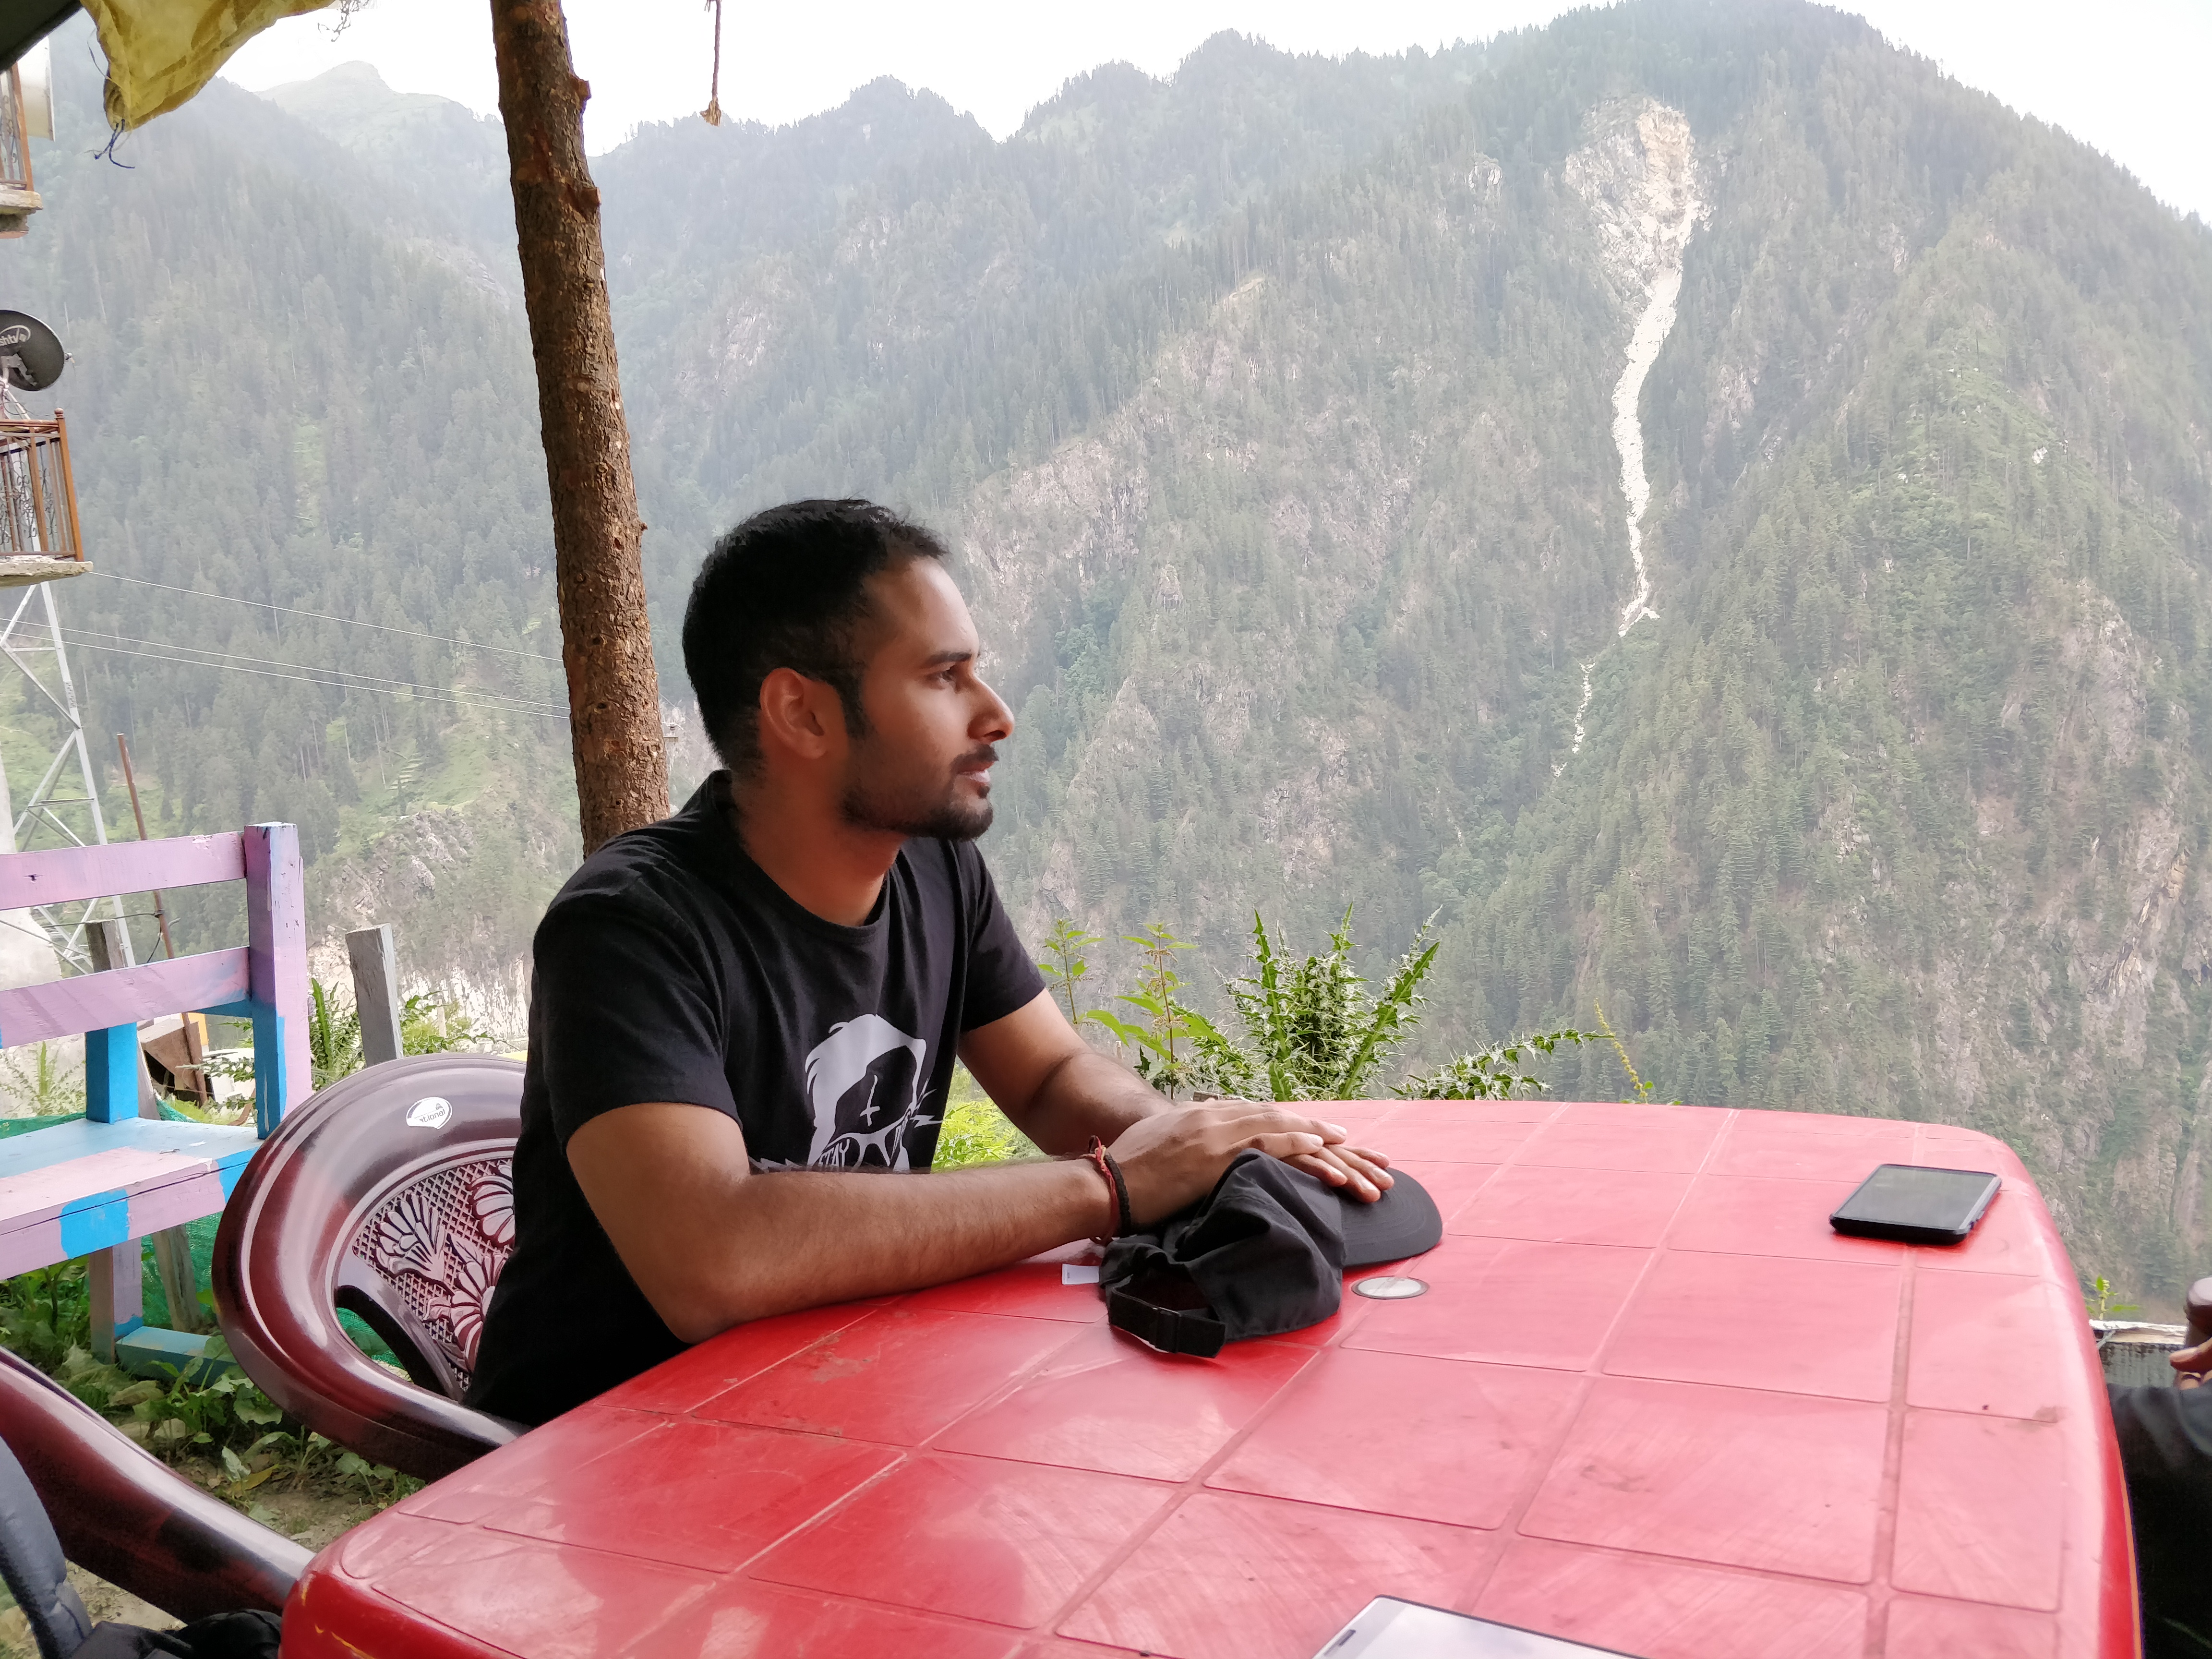 Cafe at the top in Malana Village